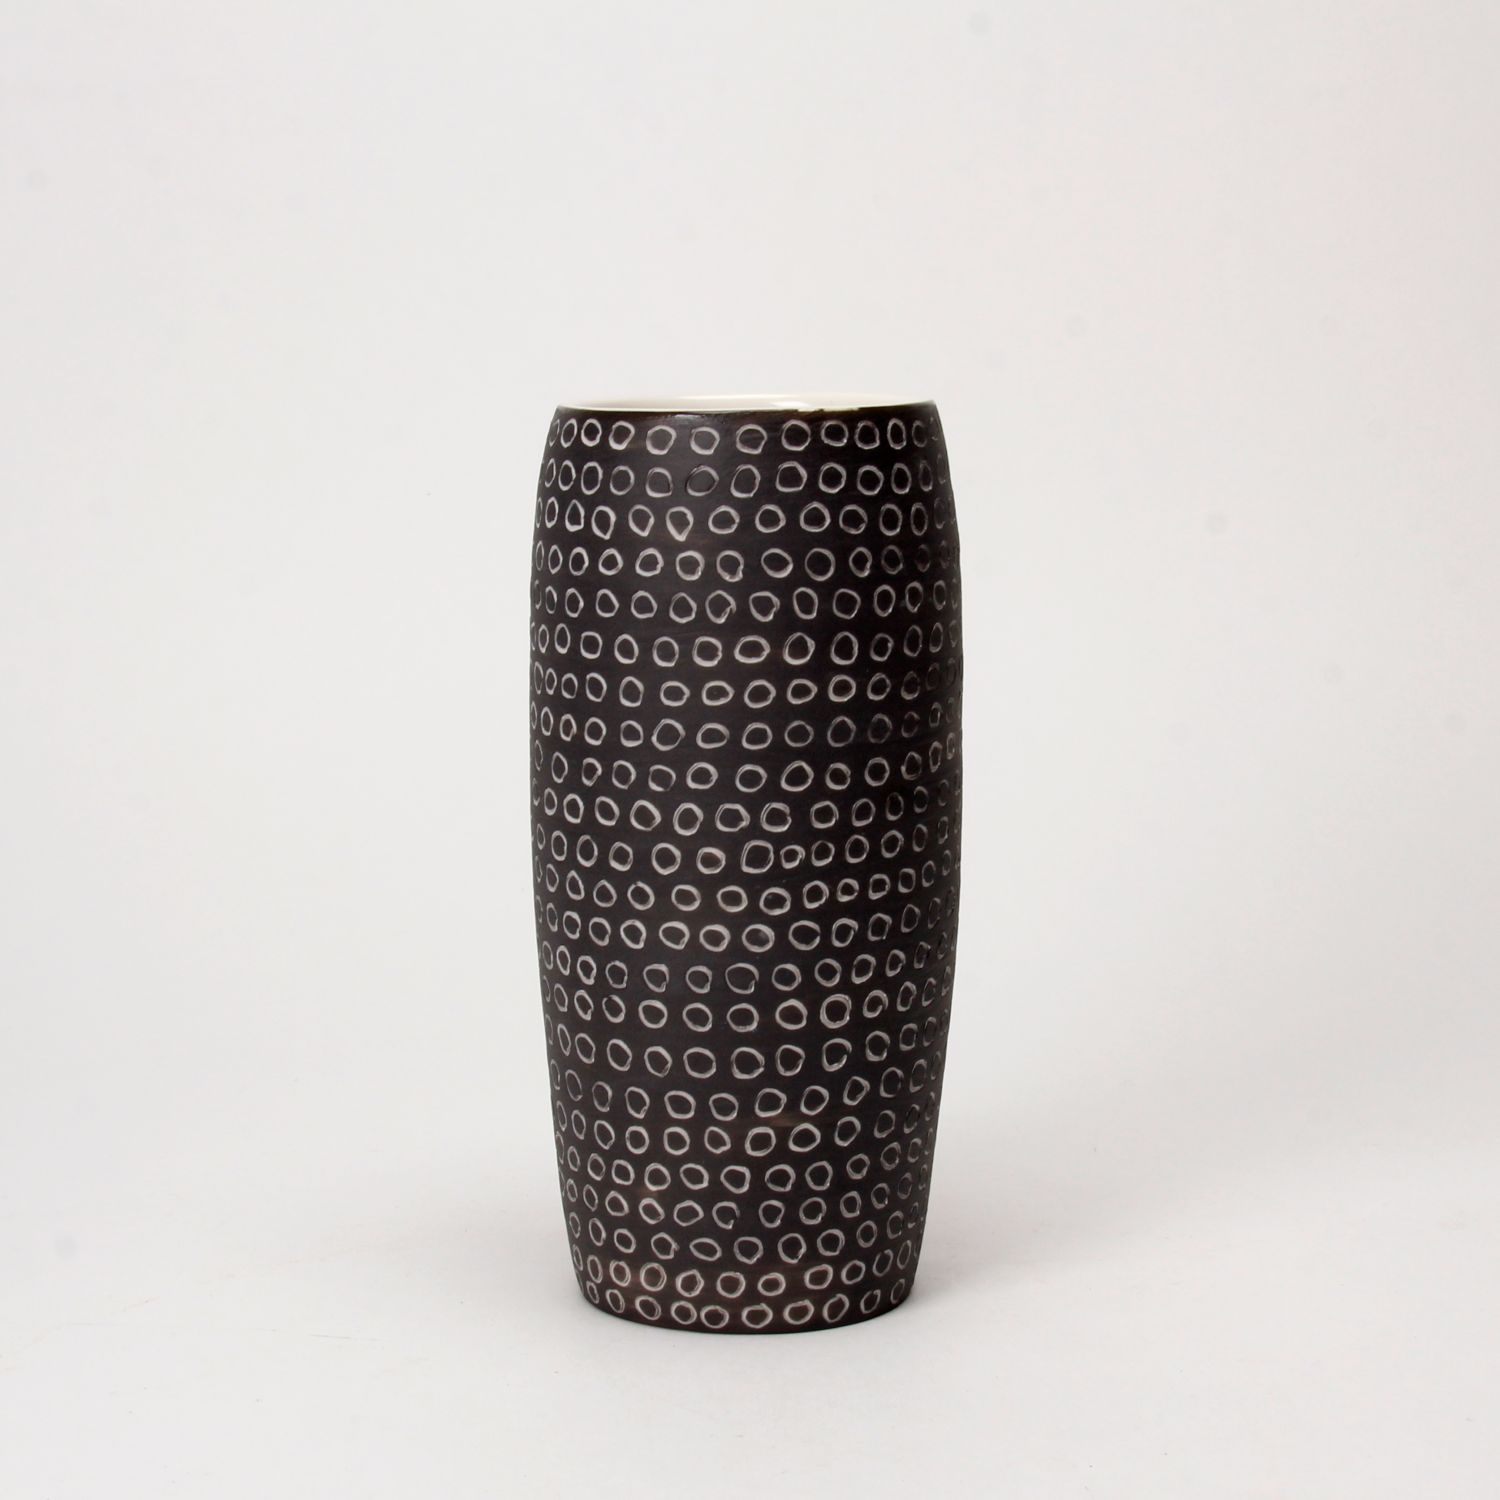 Cuir Ceramics: Black and White Vase Product Image 1 of 5